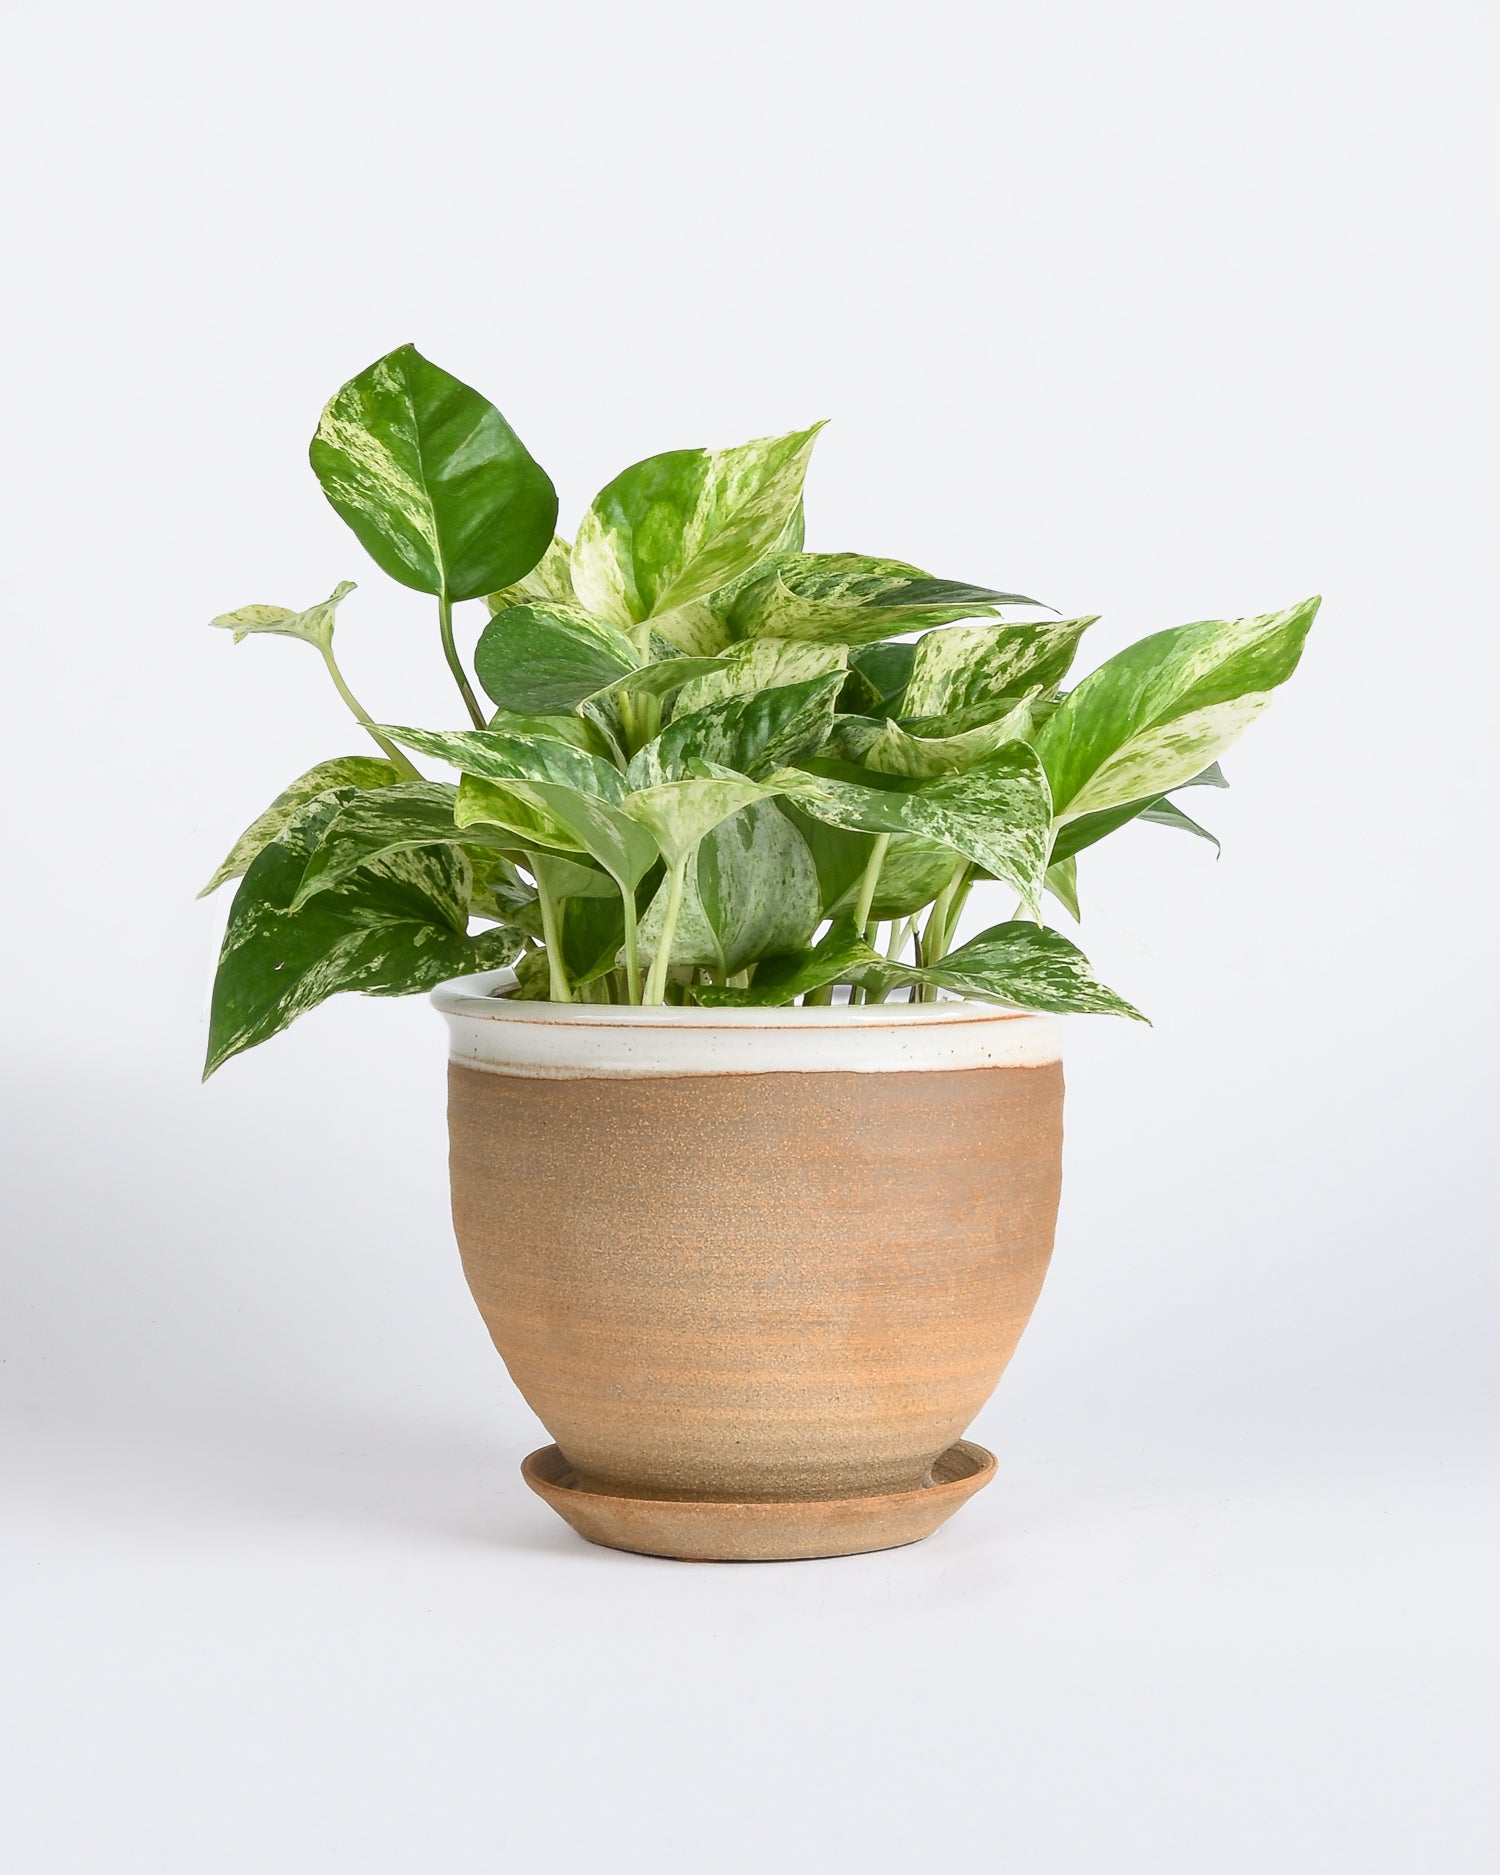 6" Pothos 'Marble Queen' potted into large dipped stoneware planter with white glaze around the opening of the planter